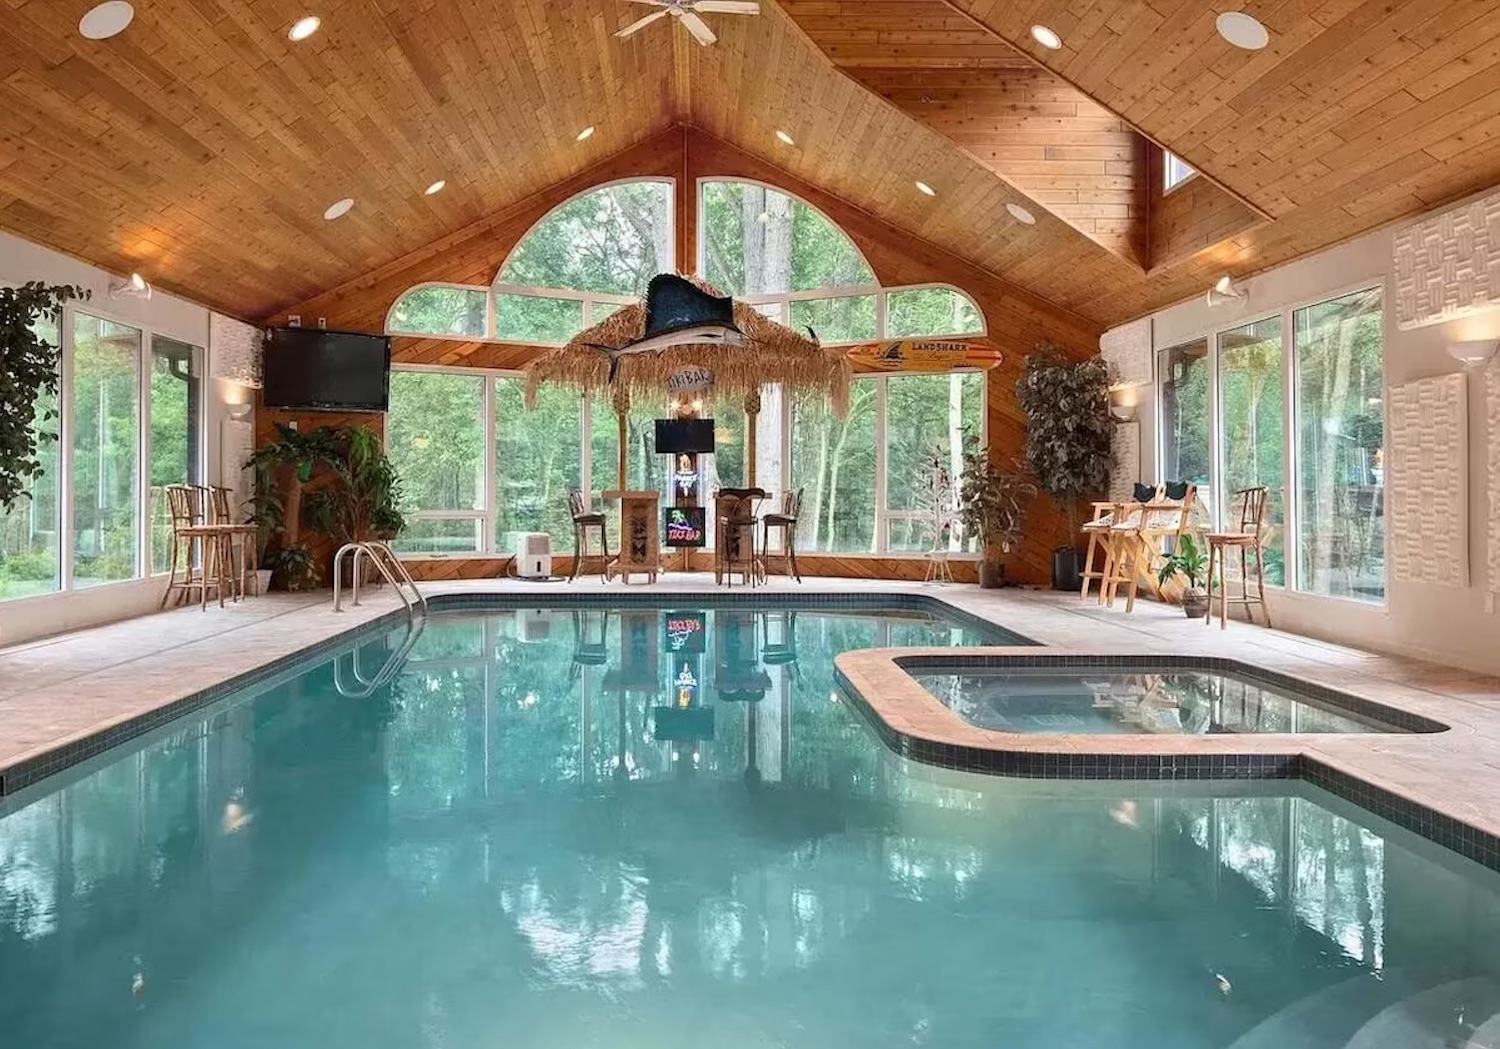 Indoor pool in a light-colored wood room 